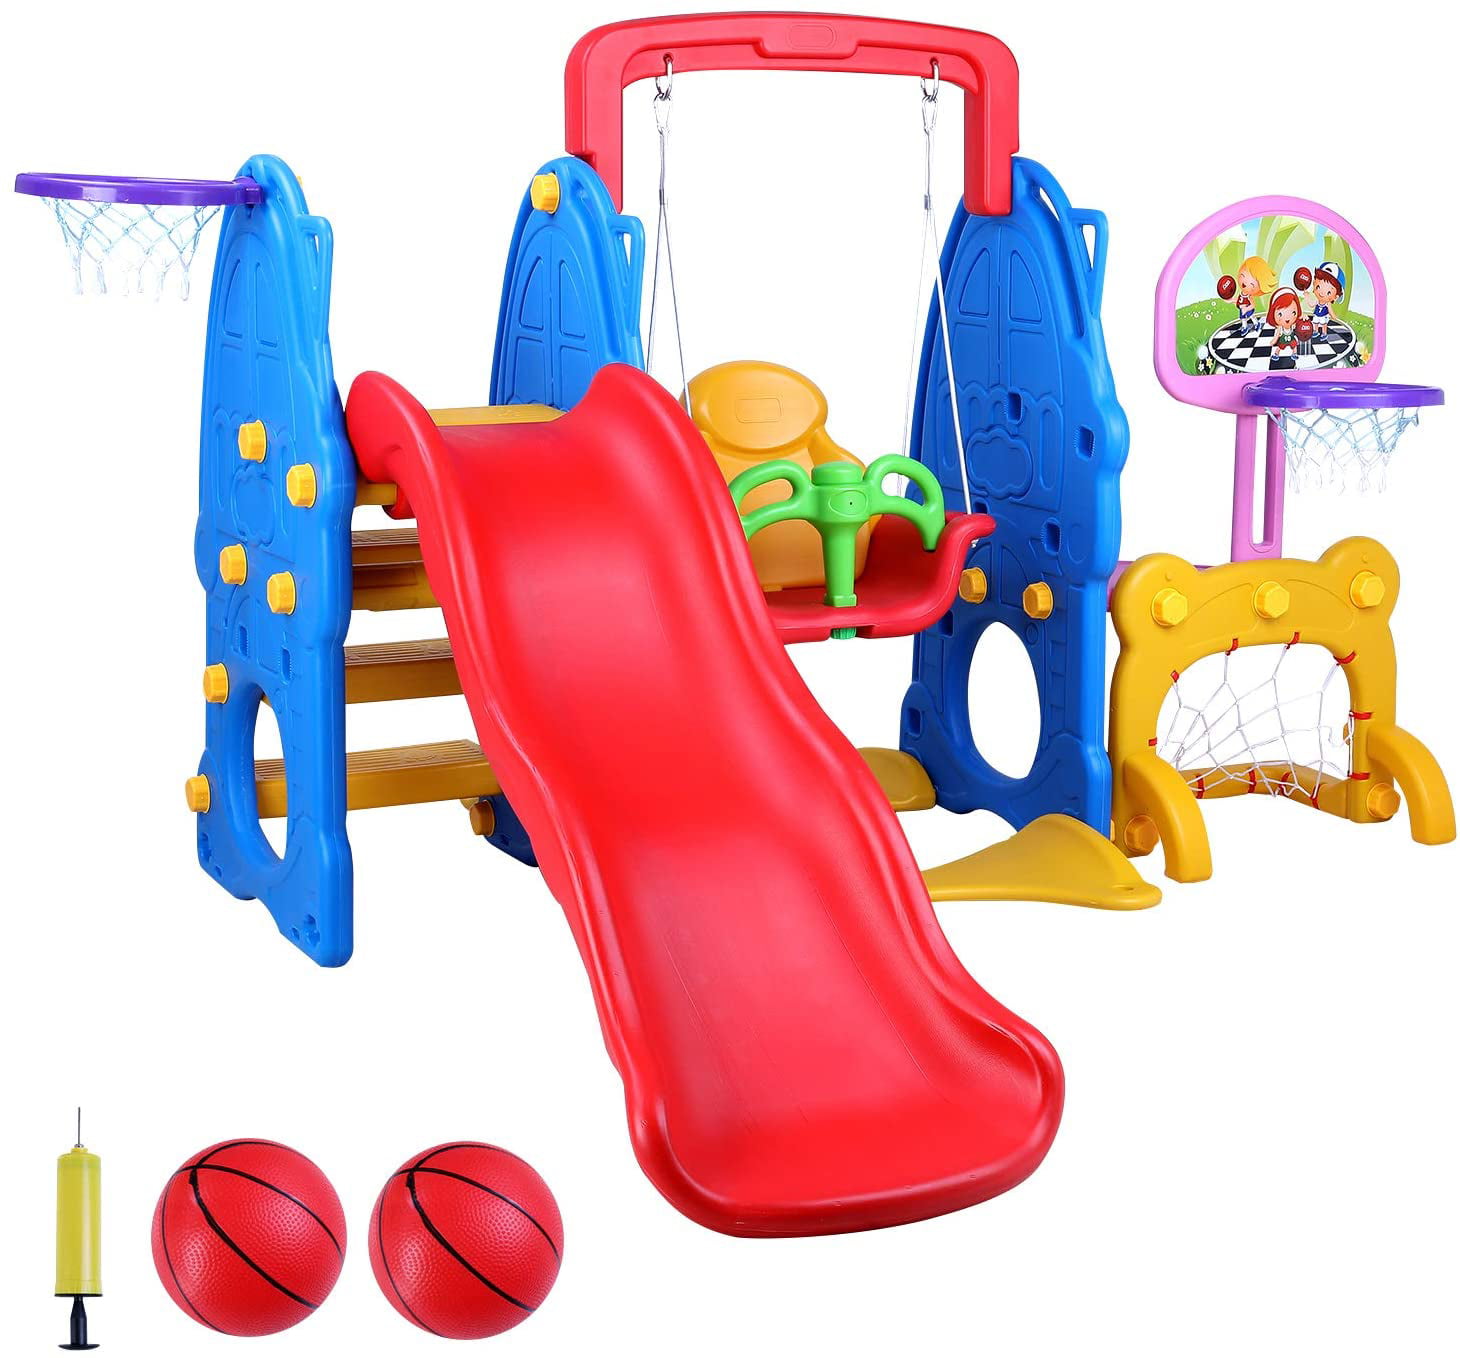 ROLENUNE Children Slide Climber and Swing Set 3 in 1 Kids Playset Indoor Outdoor Toddler Playground Toy with Basketball Hoop Game Activity Center in Backyard Boy Girl Age for 4 5 6 Year Old Blue 